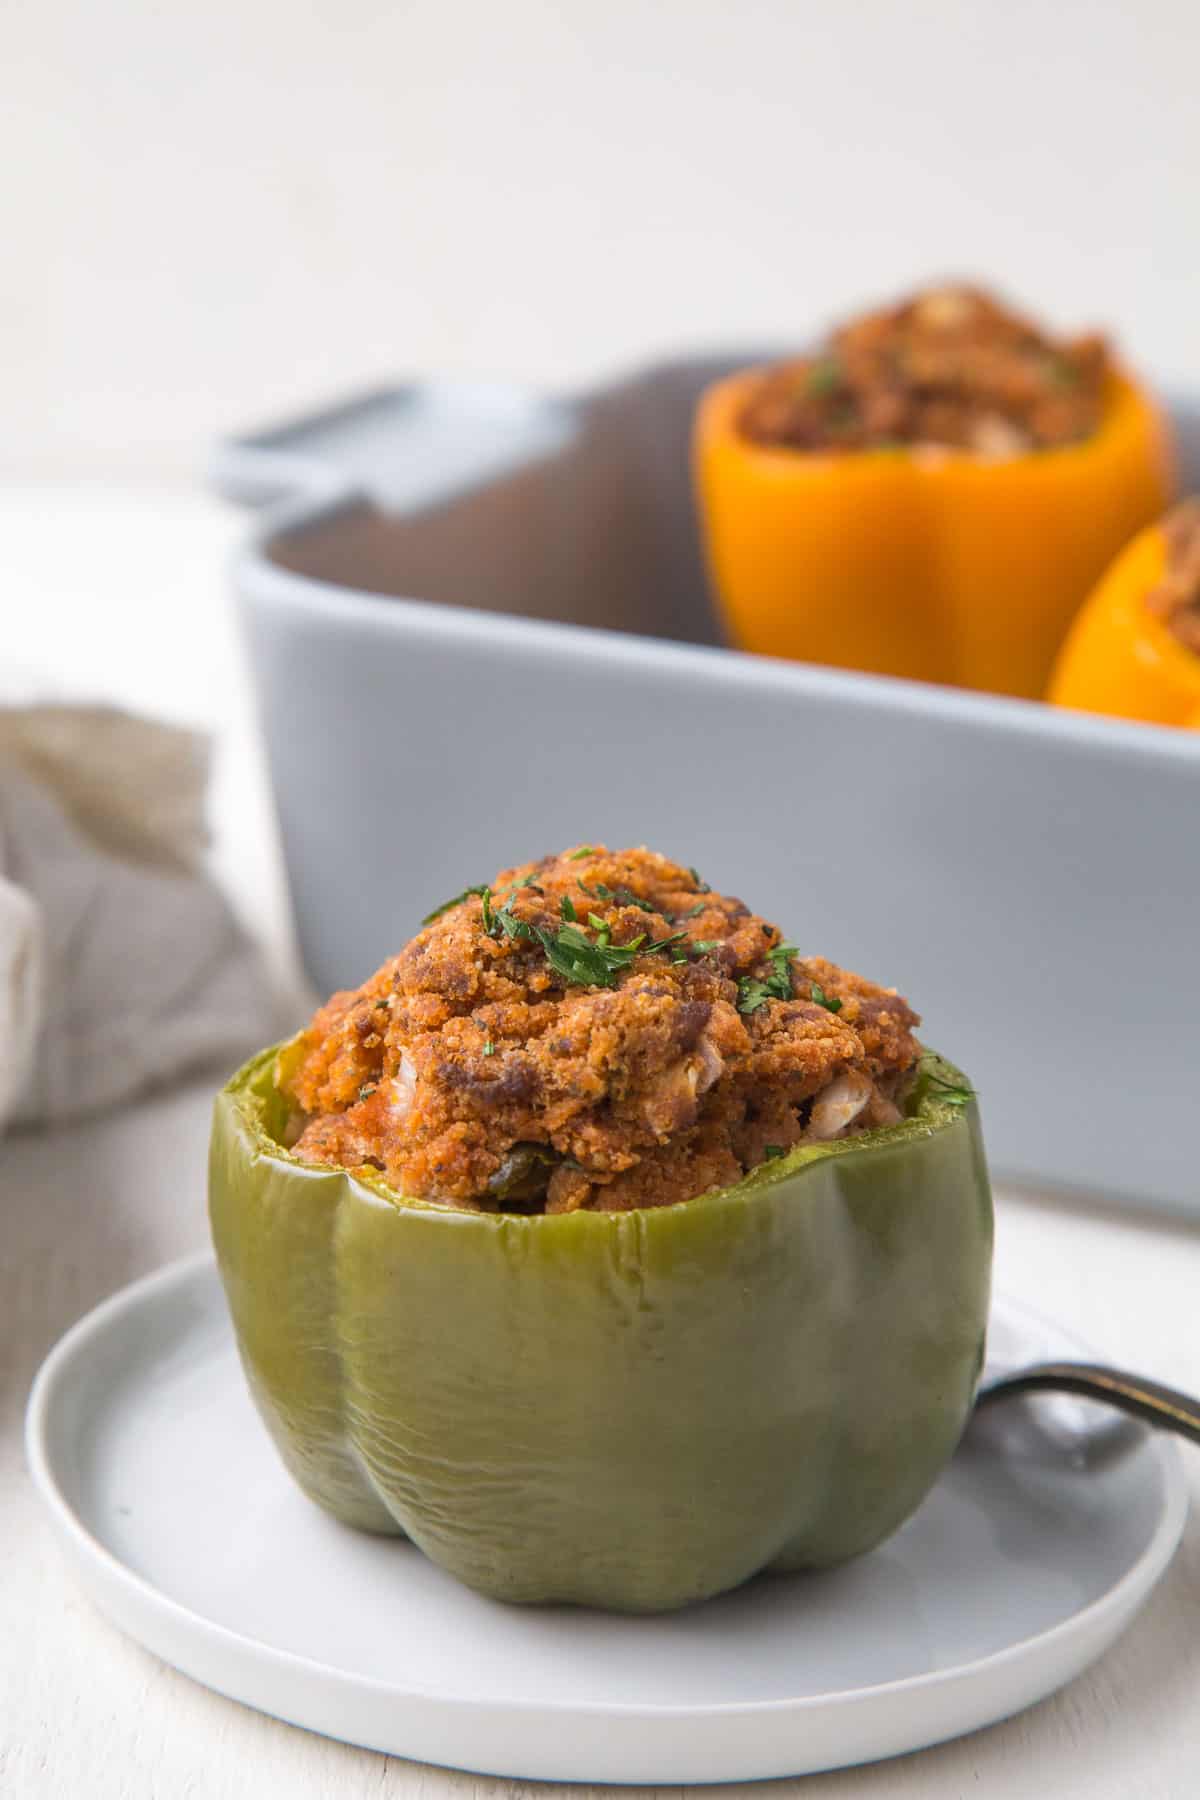 green stuffed pepper on a small white plate in front of a casserole dish with more stuffed peppers.